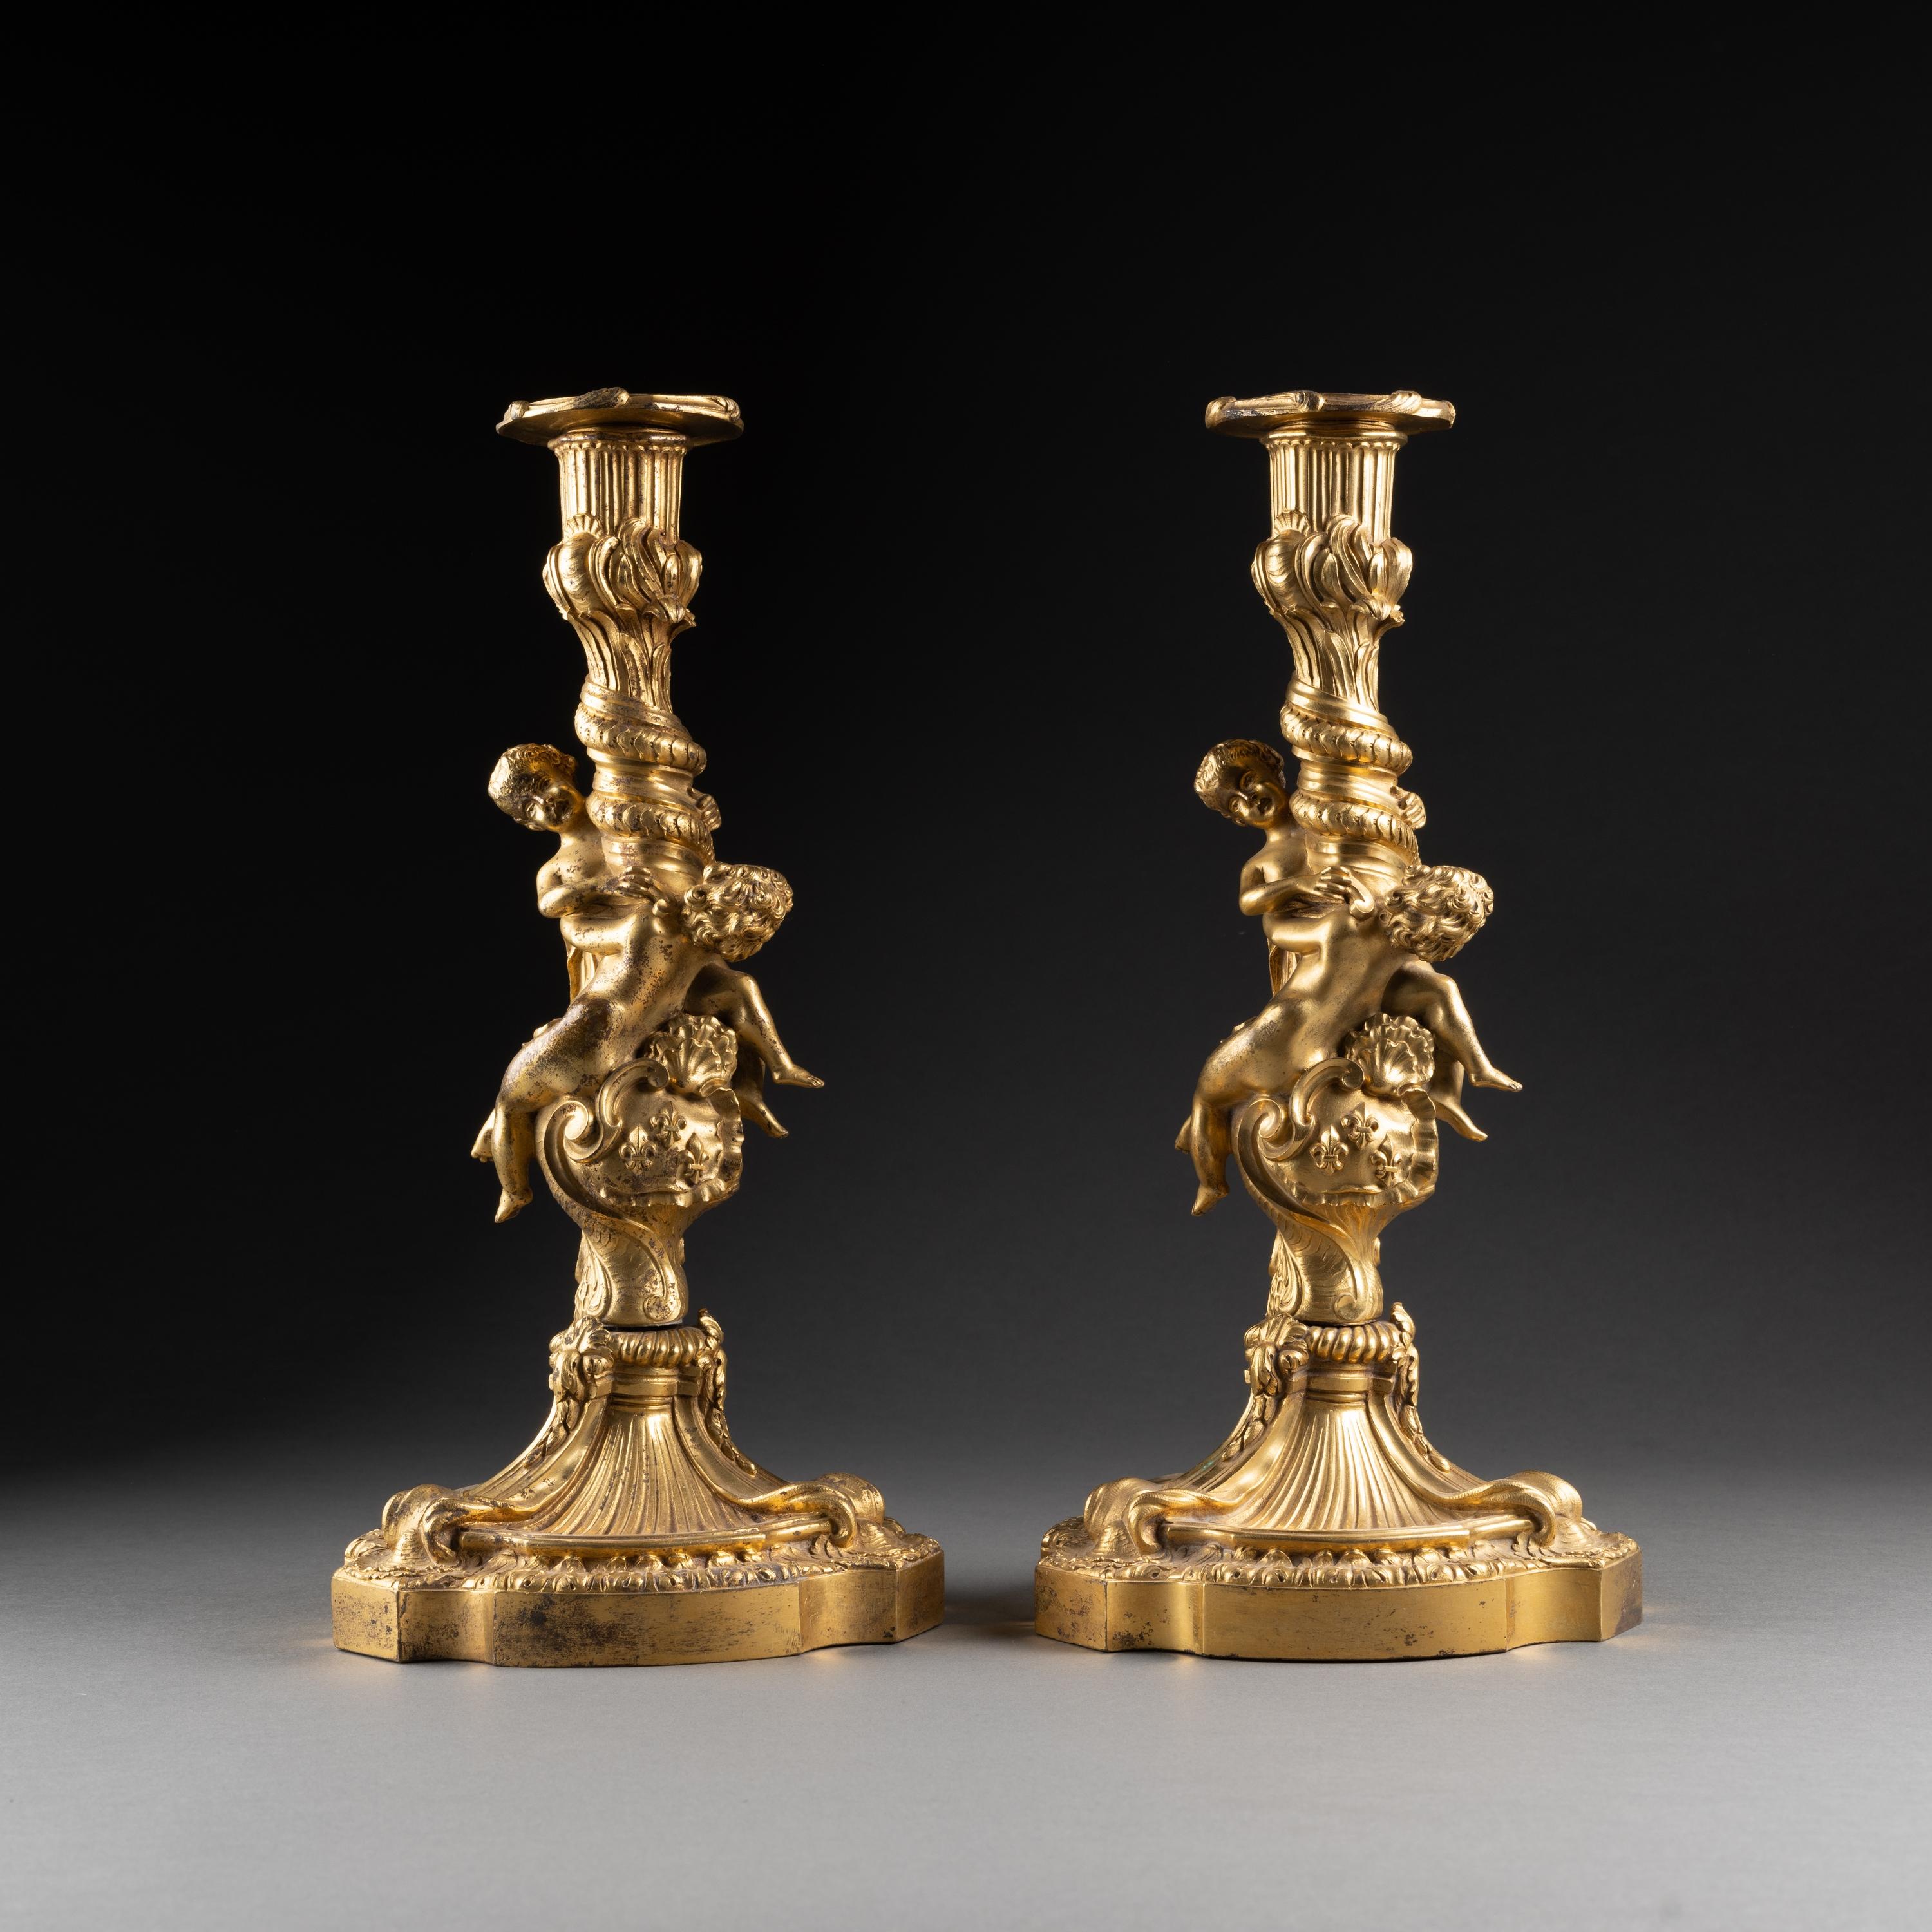 19th C. Pair of Louis XV Gilt Bronze Candlesticks with French Royal Coat of Arms For Sale 10